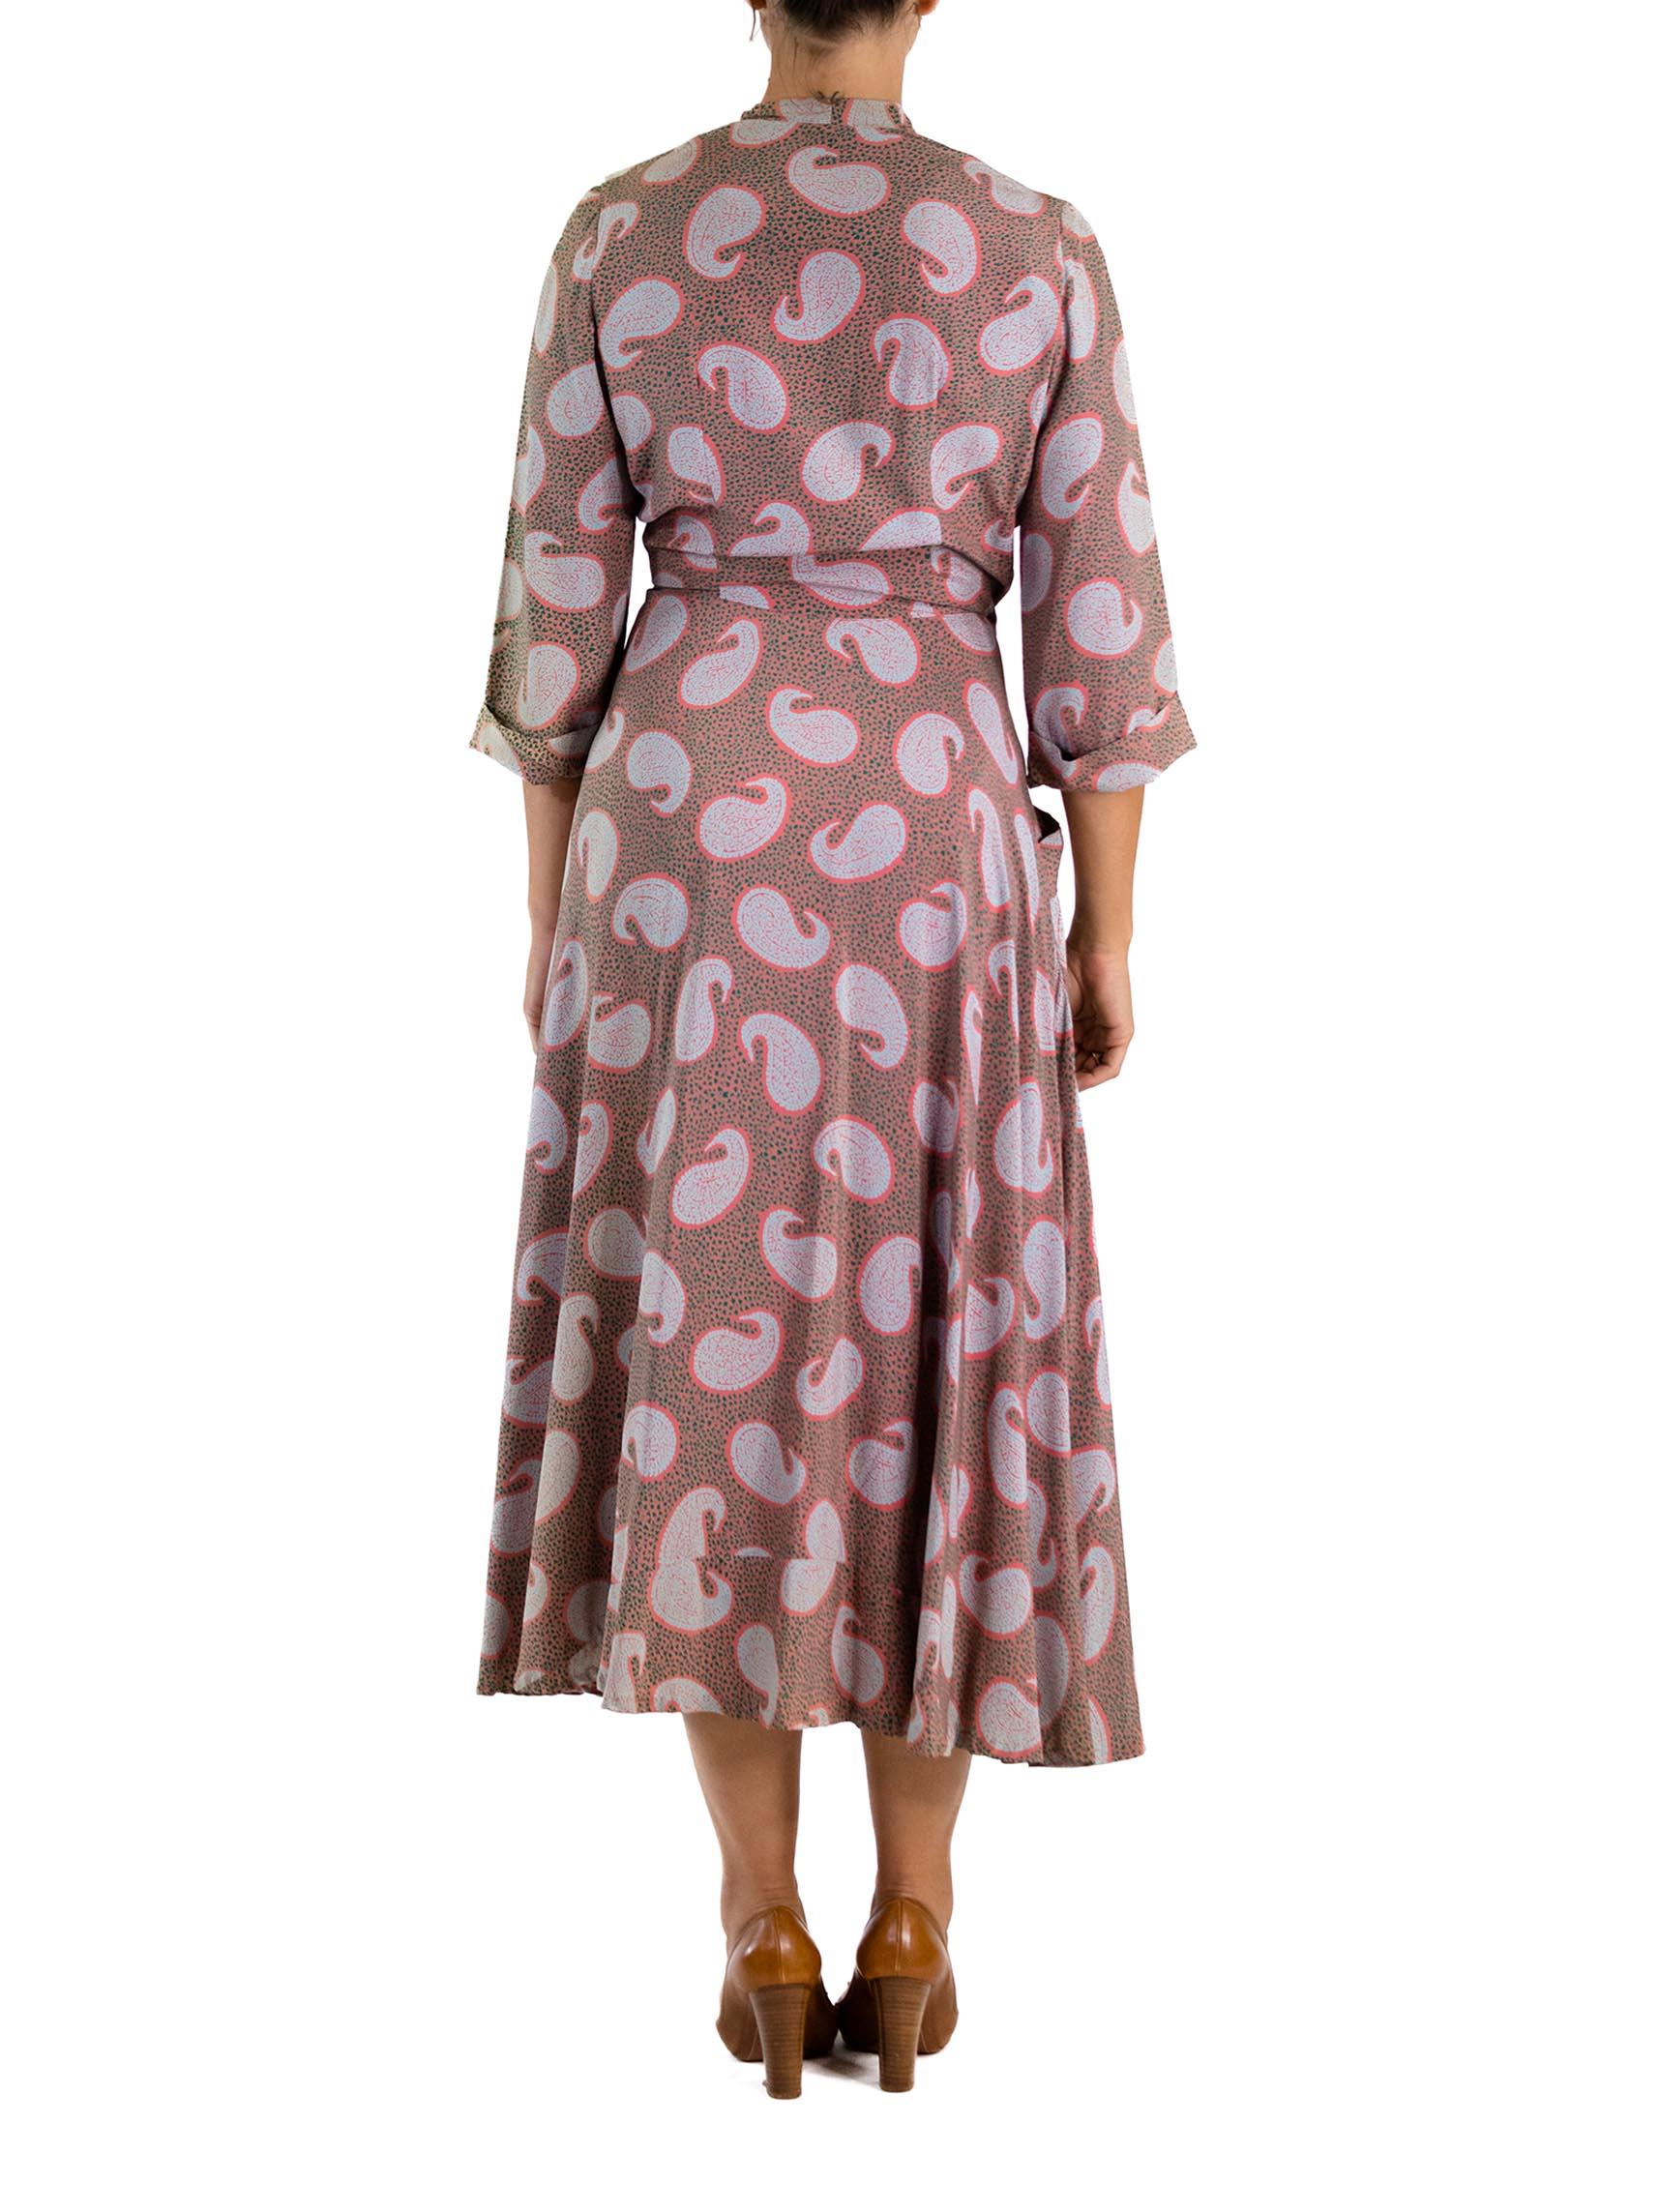 Women's 1940S SAYBURY Tan & Blue Cold Rayon  Paisley Wrap Dress With Large Button Closu For Sale